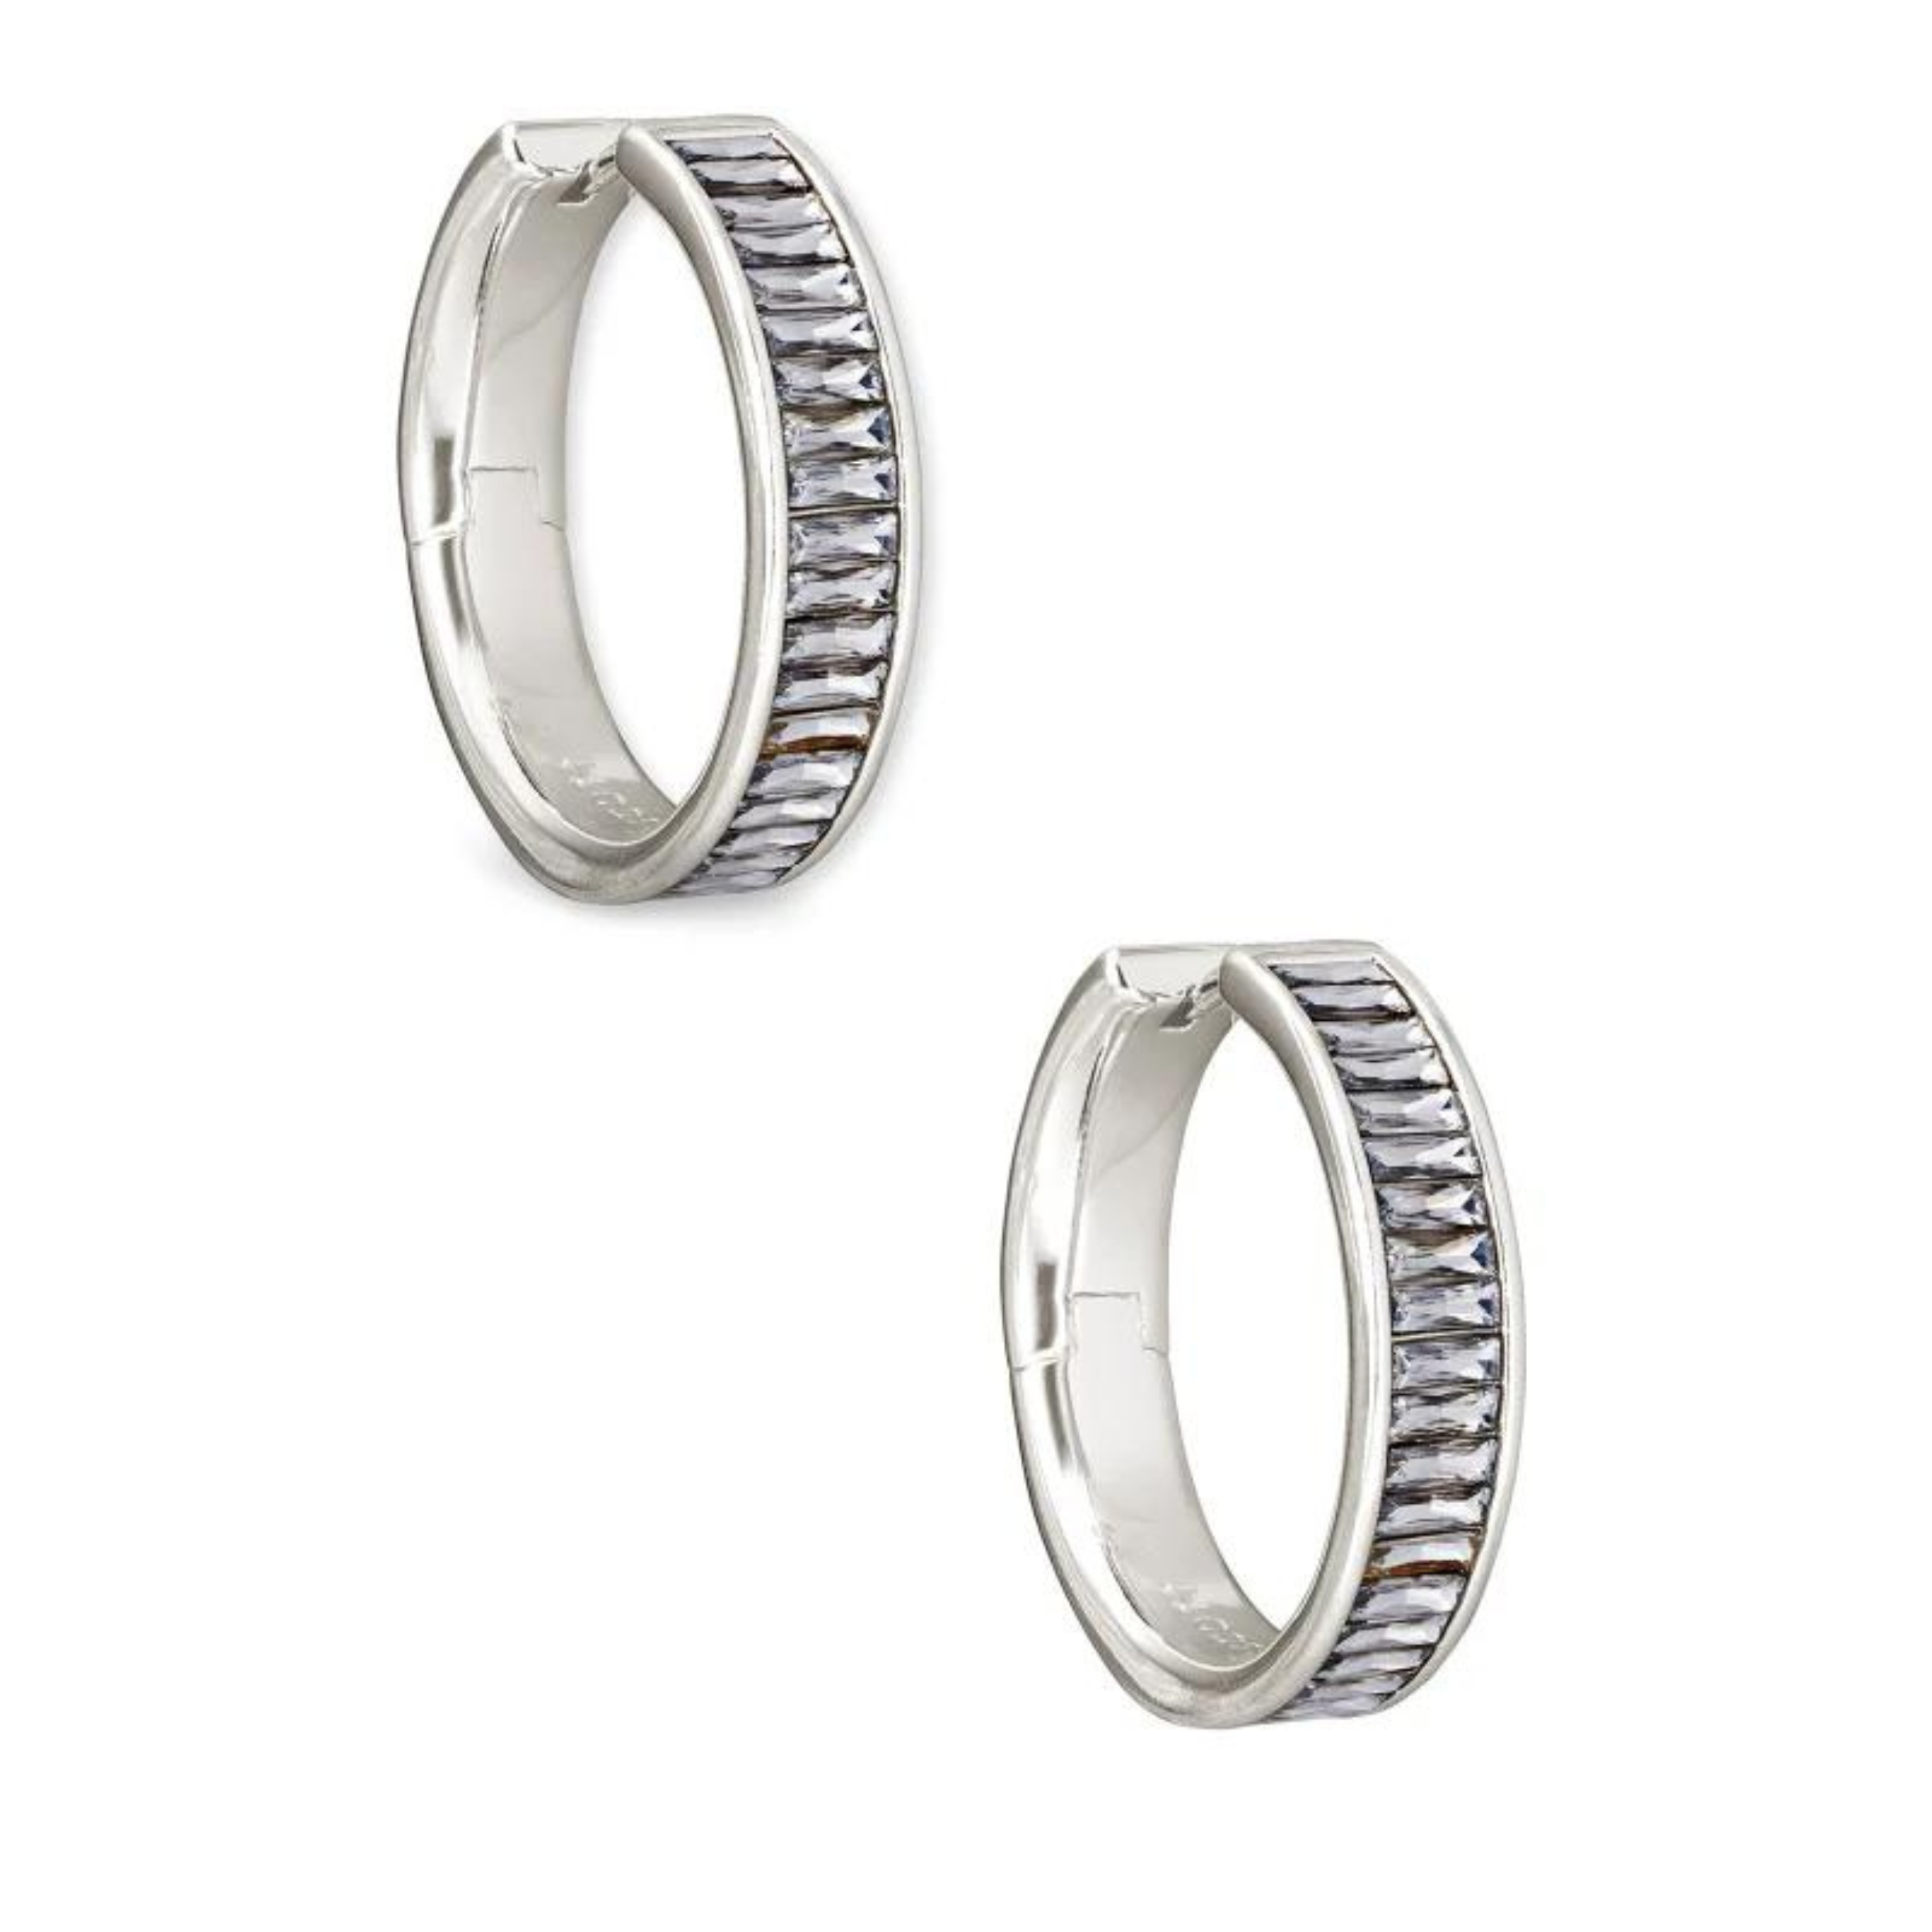 Silver hoop earrings with gray crystals, pictured on a white background.